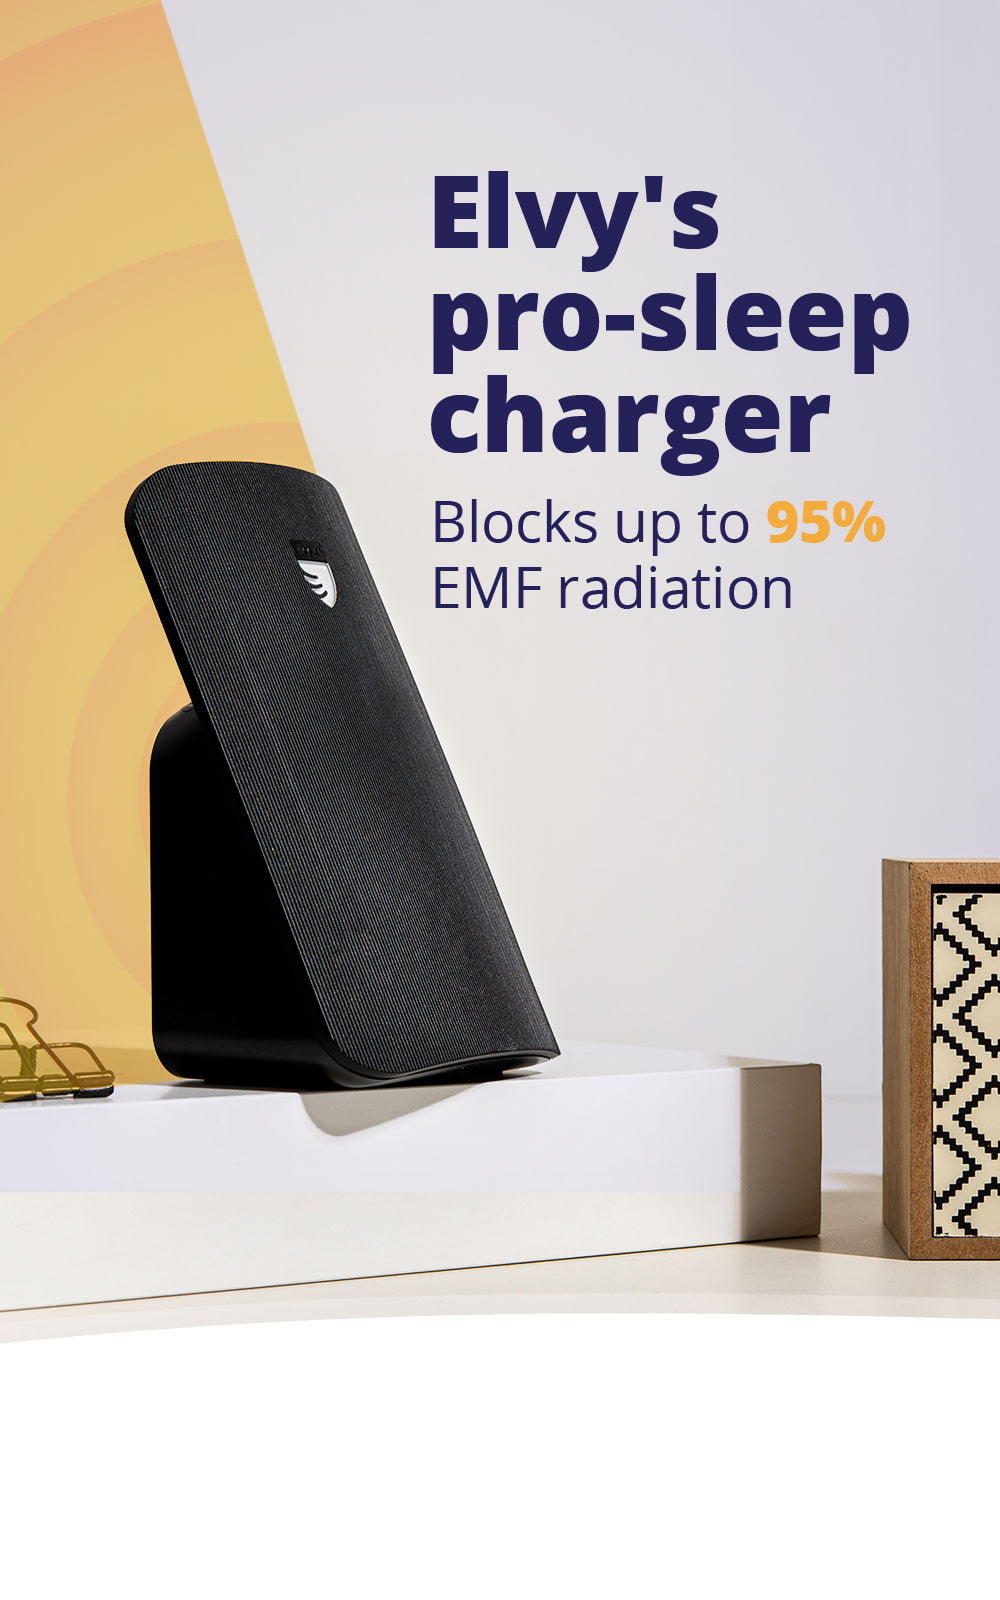 Couple Pack (Mint Green, Jet Black) - Elvy Advanced EMF Blocker for Cell  Phone and Qi Wireless Charger: Sleep Aid Device with EMF Protection, Fast